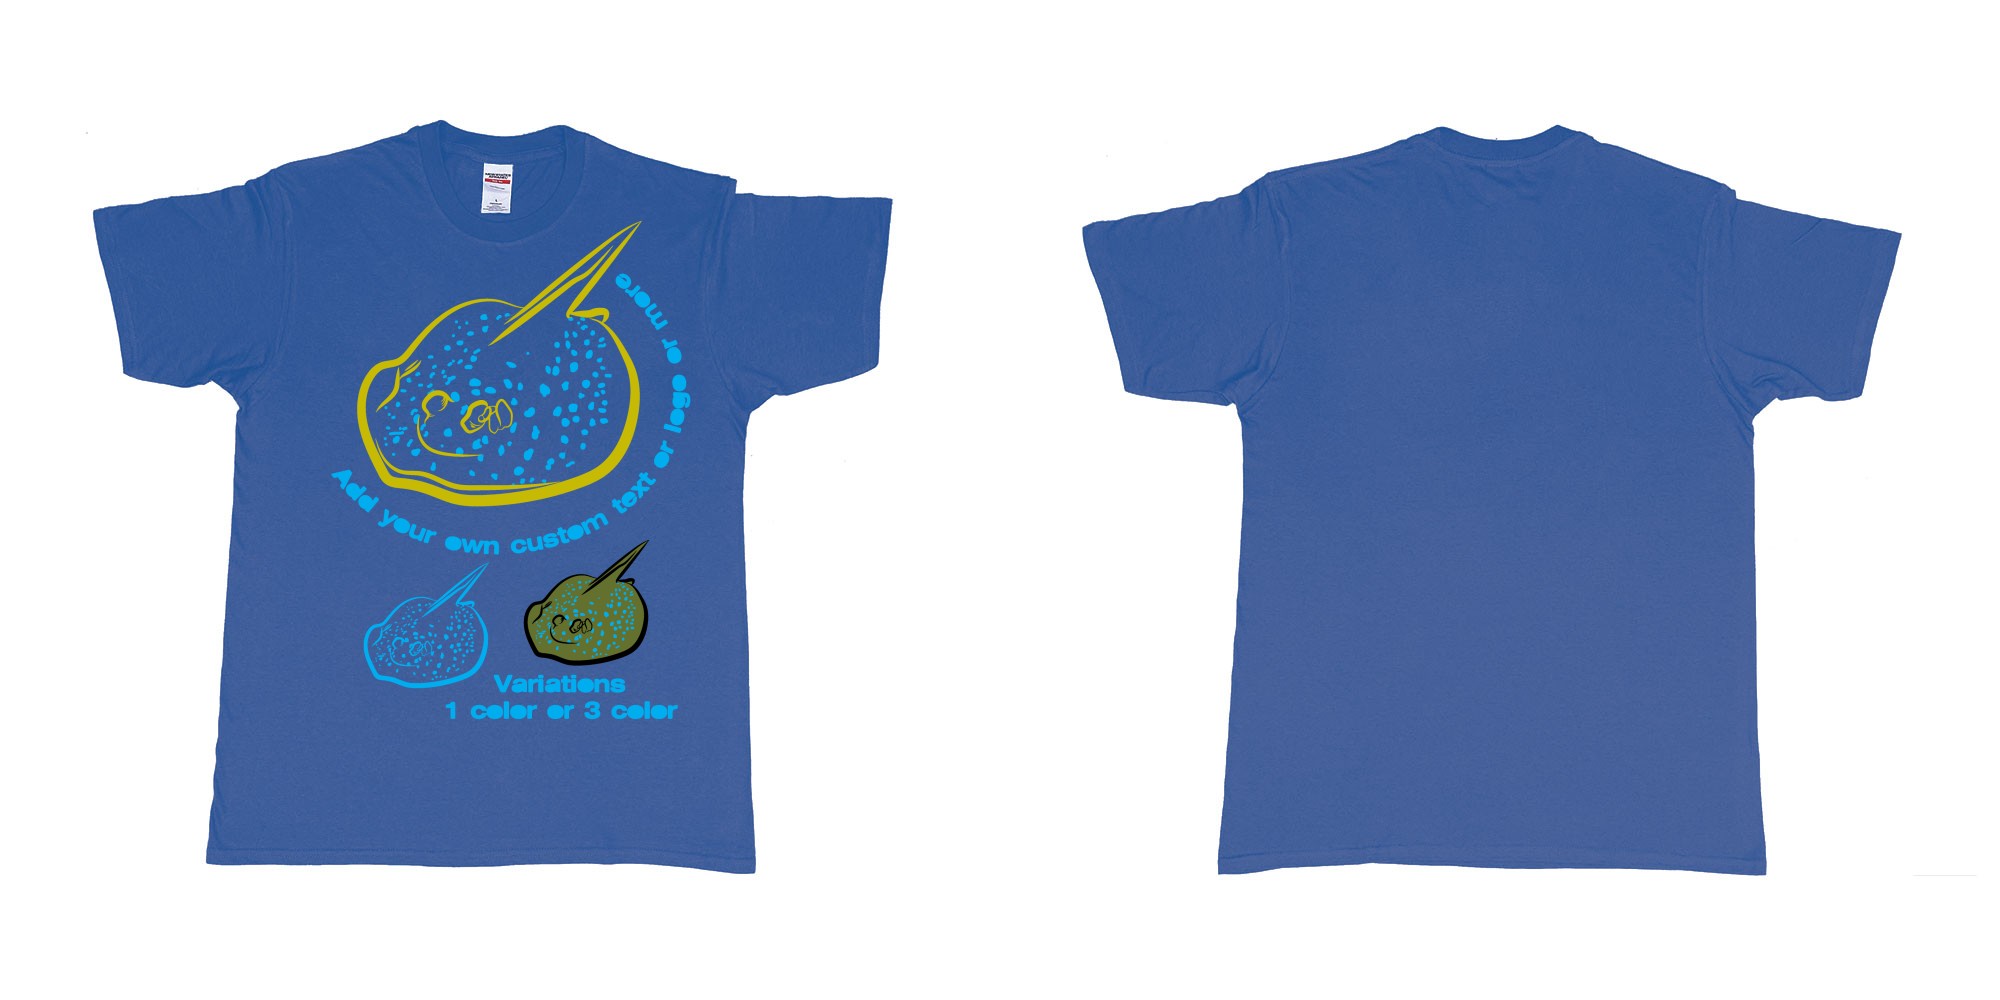 Custom tshirt design blue spotted stingray in fabric color royal-blue choice your own text made in Bali by The Pirate Way